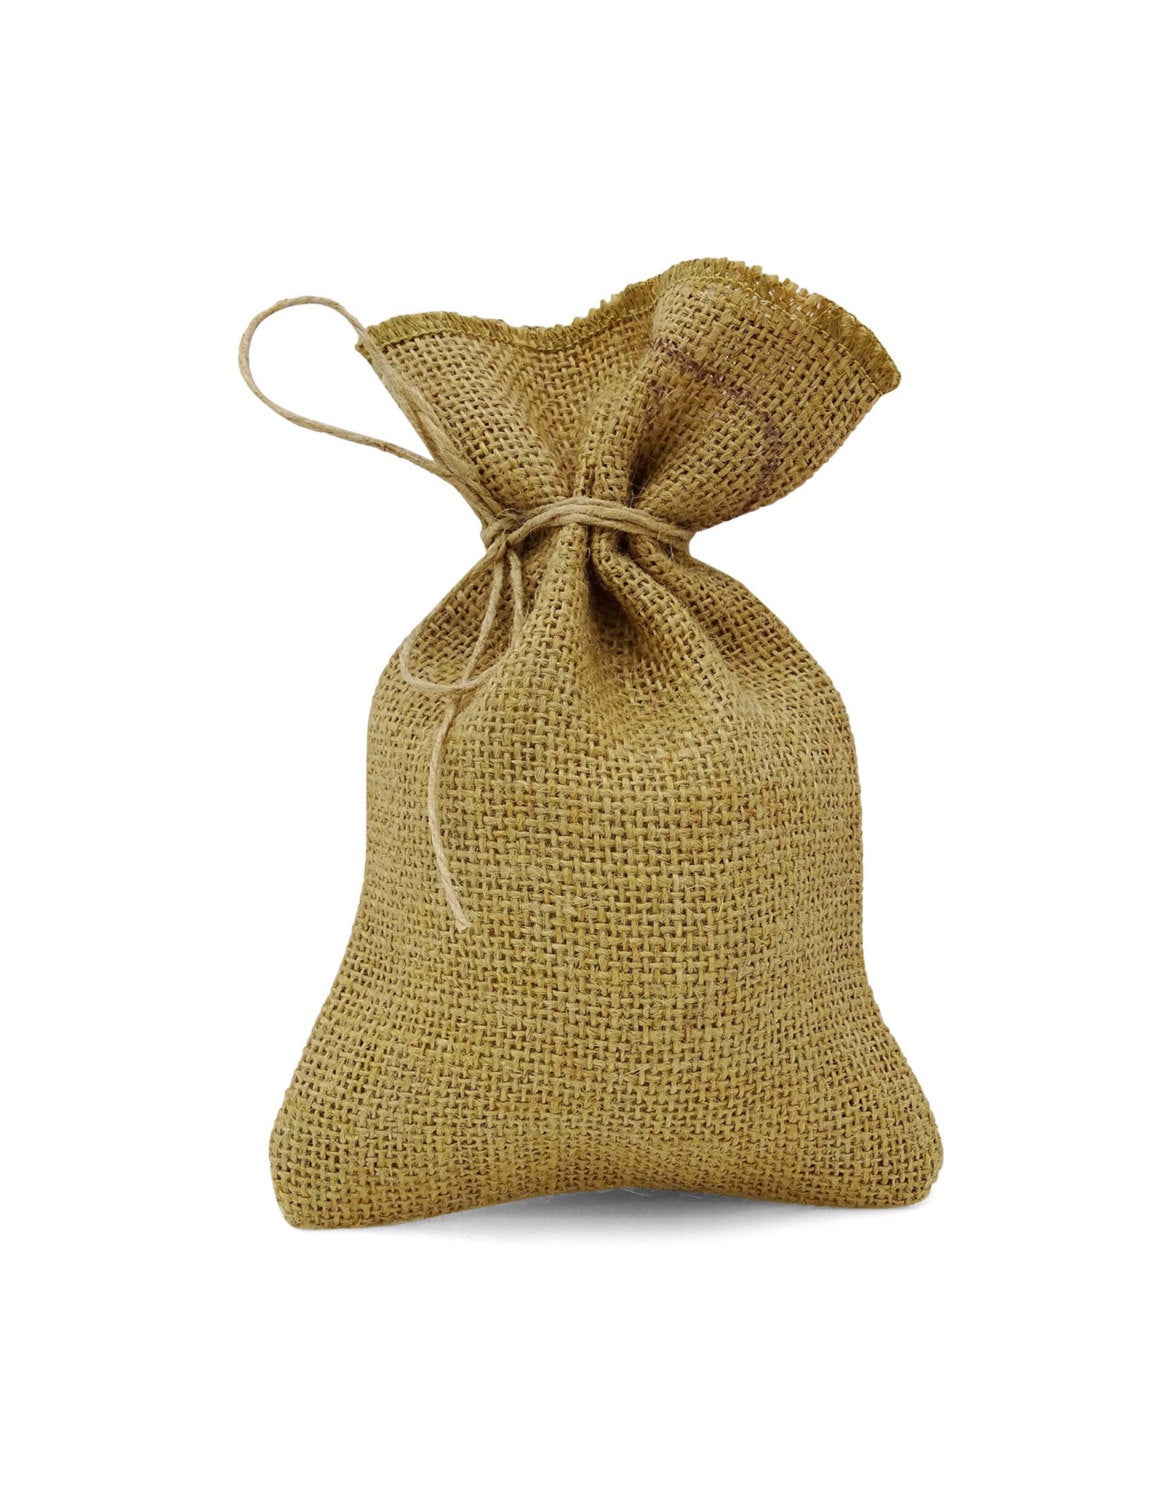 30x Small Burlap Natural Linen Jute Sack Jewelry Pouch Drawstring Gift Bags  Xmas